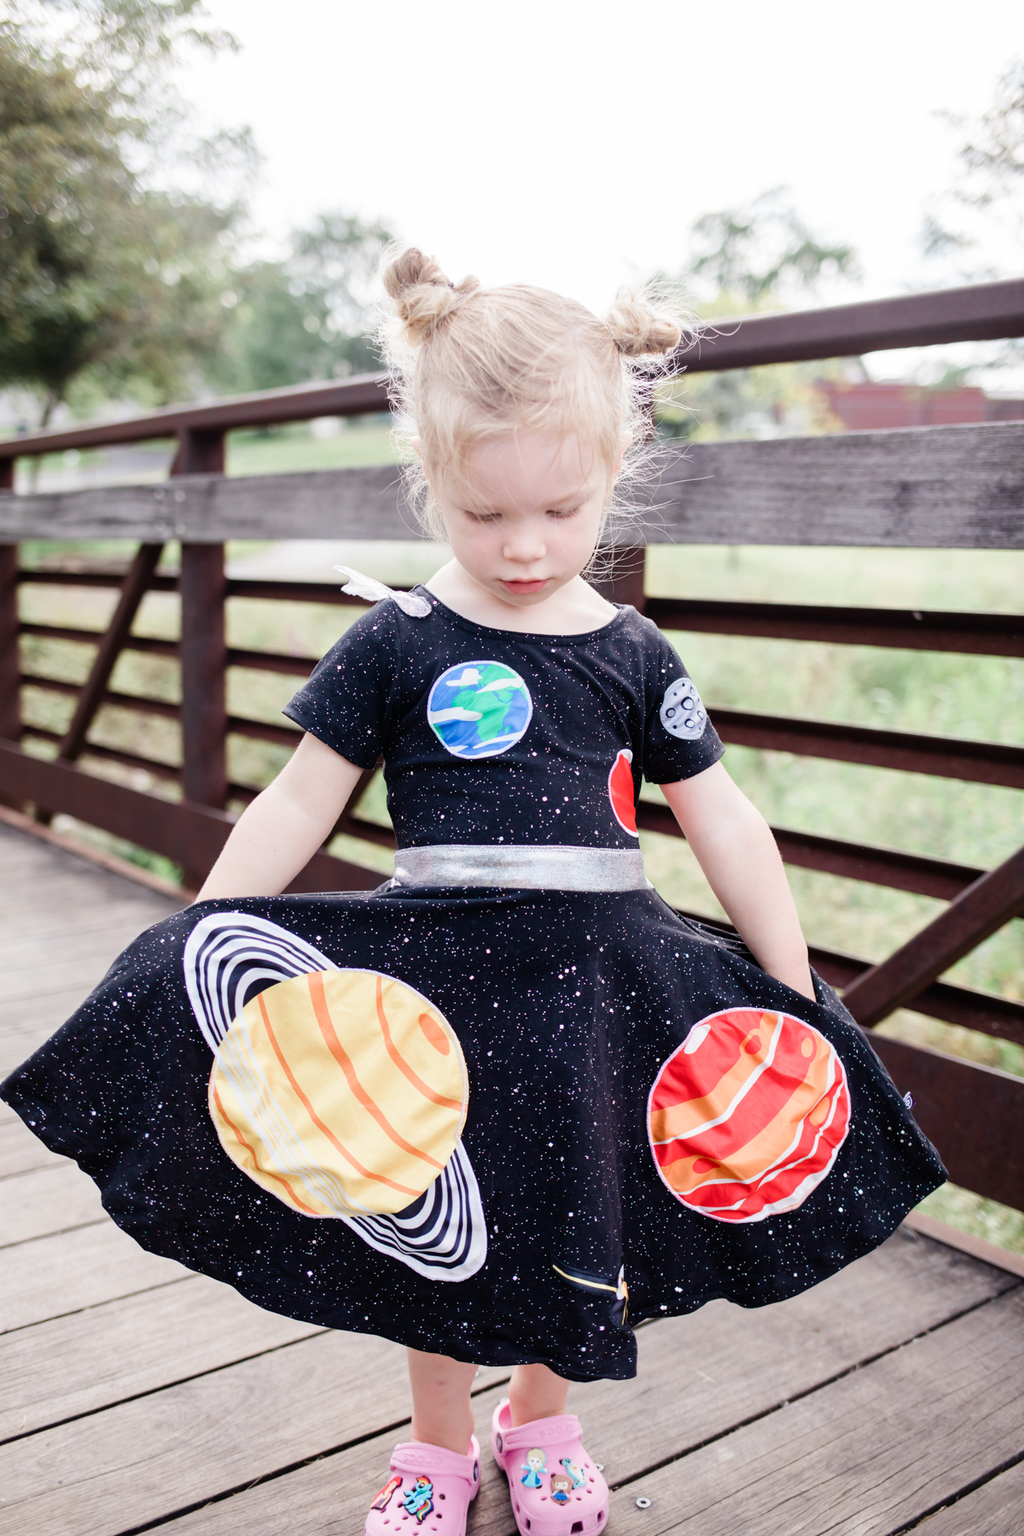 13 Adorable School Outfits For Kids Of All Ages » Read Now!